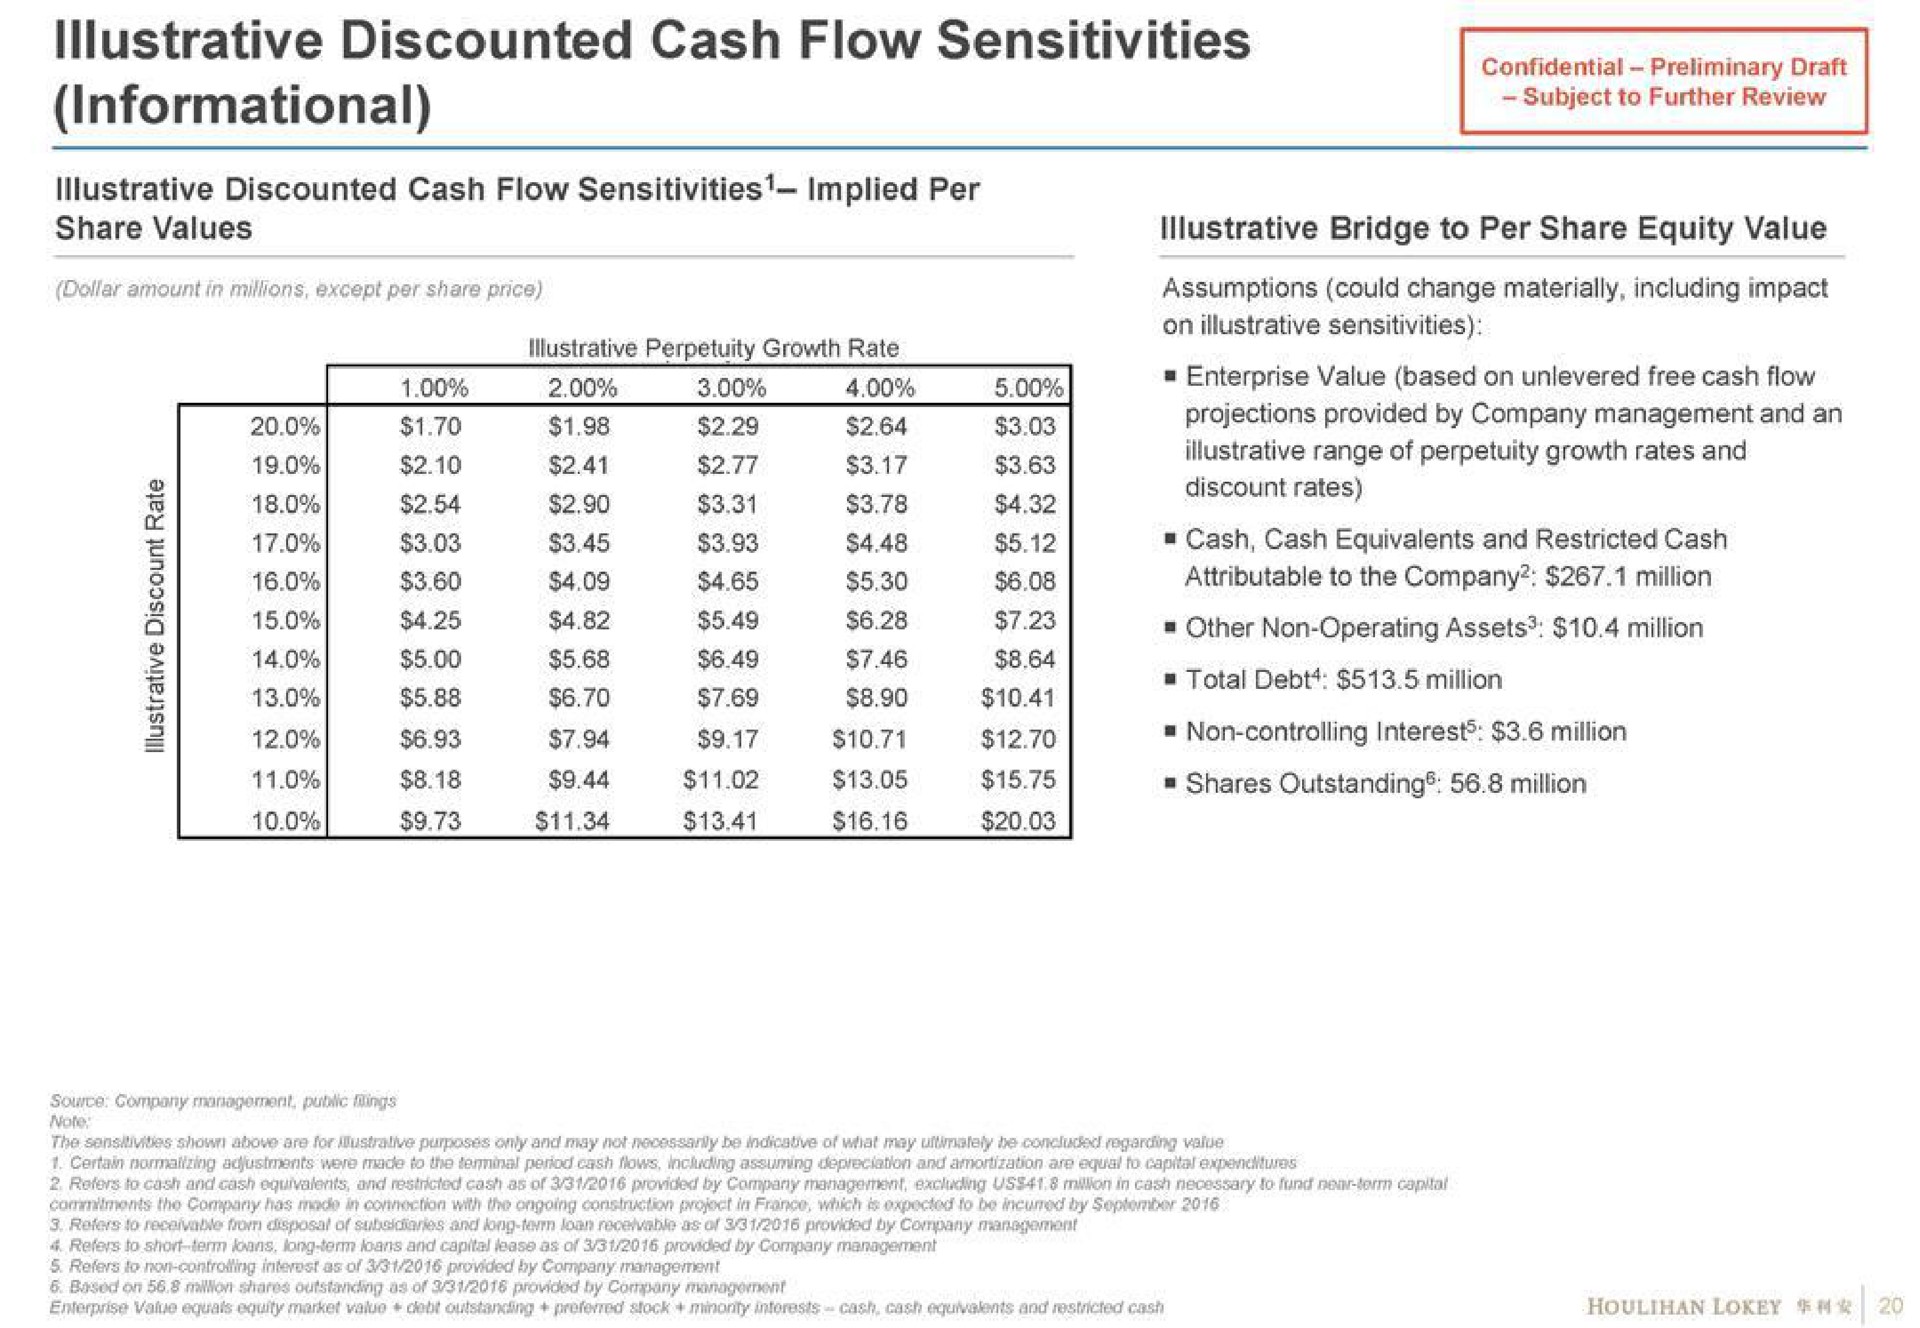 discounted cash flow sensitivities illustrative discounted cash flow sensitivities implied per share values illustrative perpetuity growth rate a a illustrative bridge to per share equity value attributable to the company million other non operating assets million | Houlihan Lokey